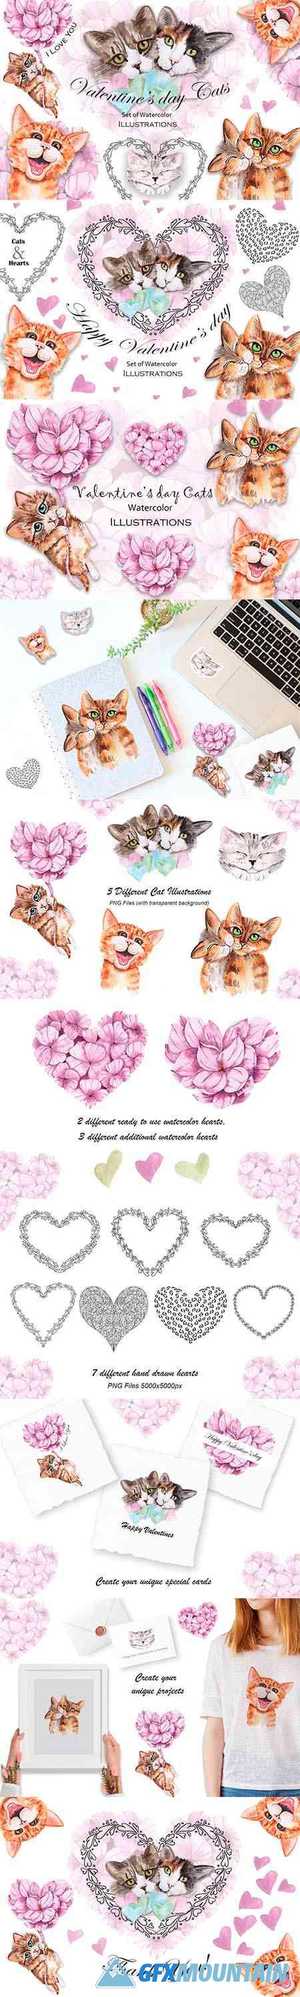 VALENTINE'S DAY WATERCOLOR CATS - 4441445